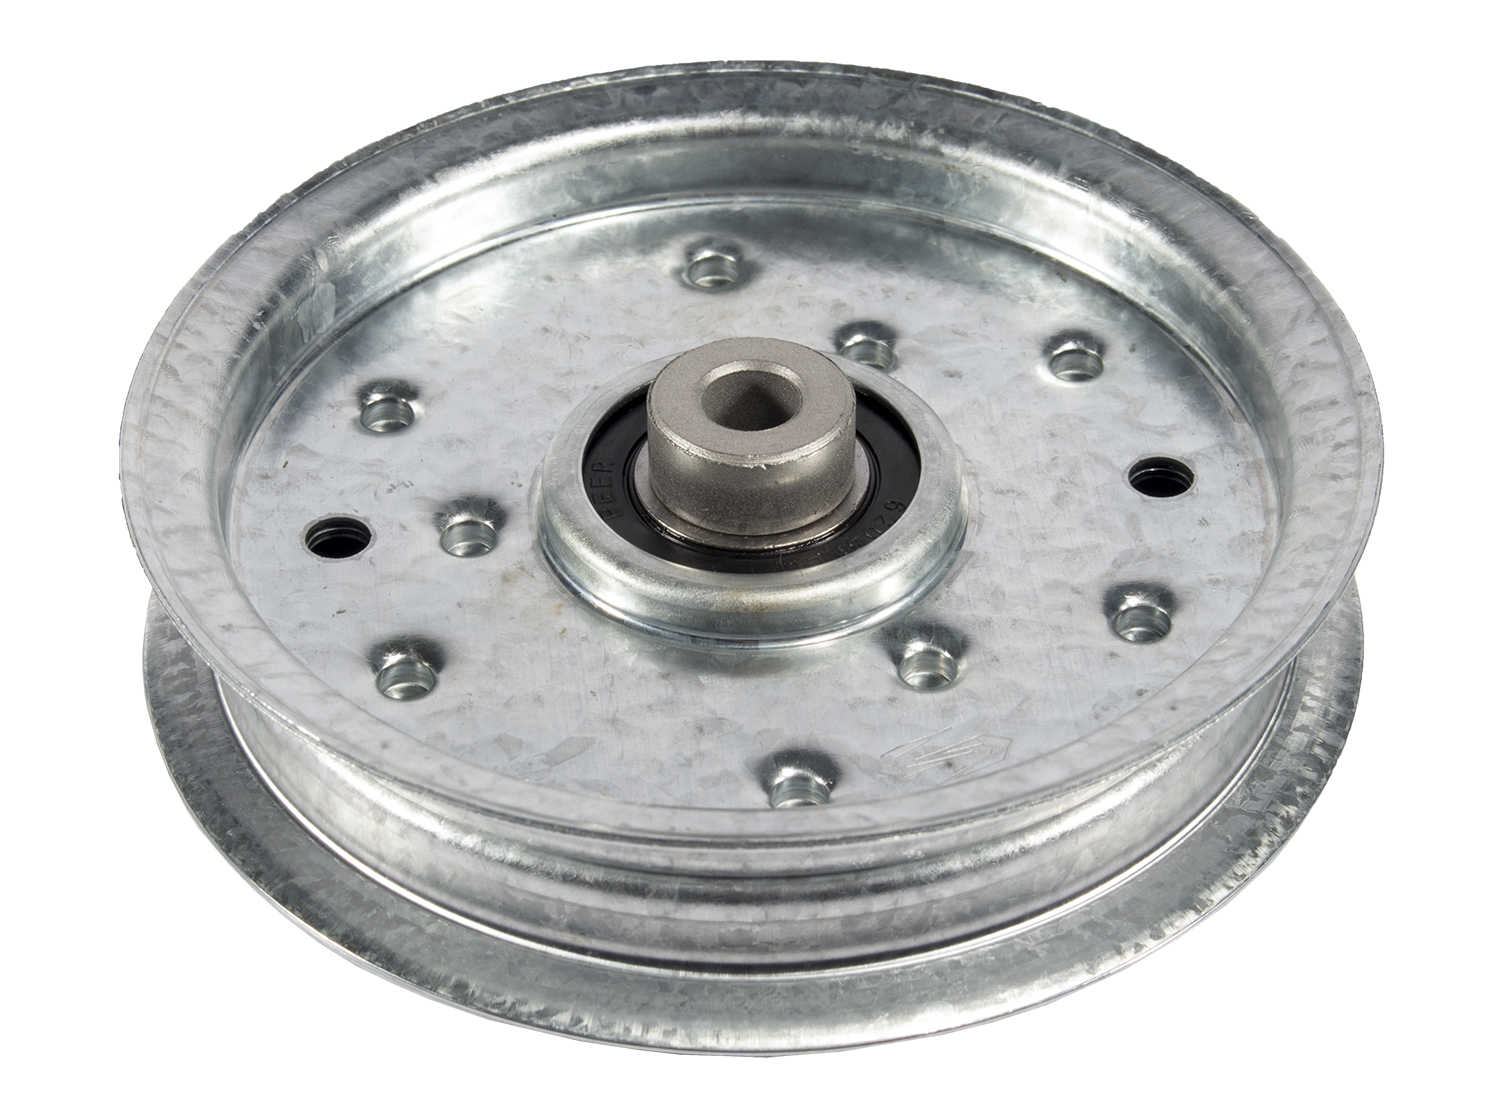 MaxPower 12675 Flat Idler Pulley (3/8' X 4-1/2') for Cub Cadet and MTD Replaces OEM #956-04129, 753-08171, 756-04129, 75604129B, 75604129C, 956-04129